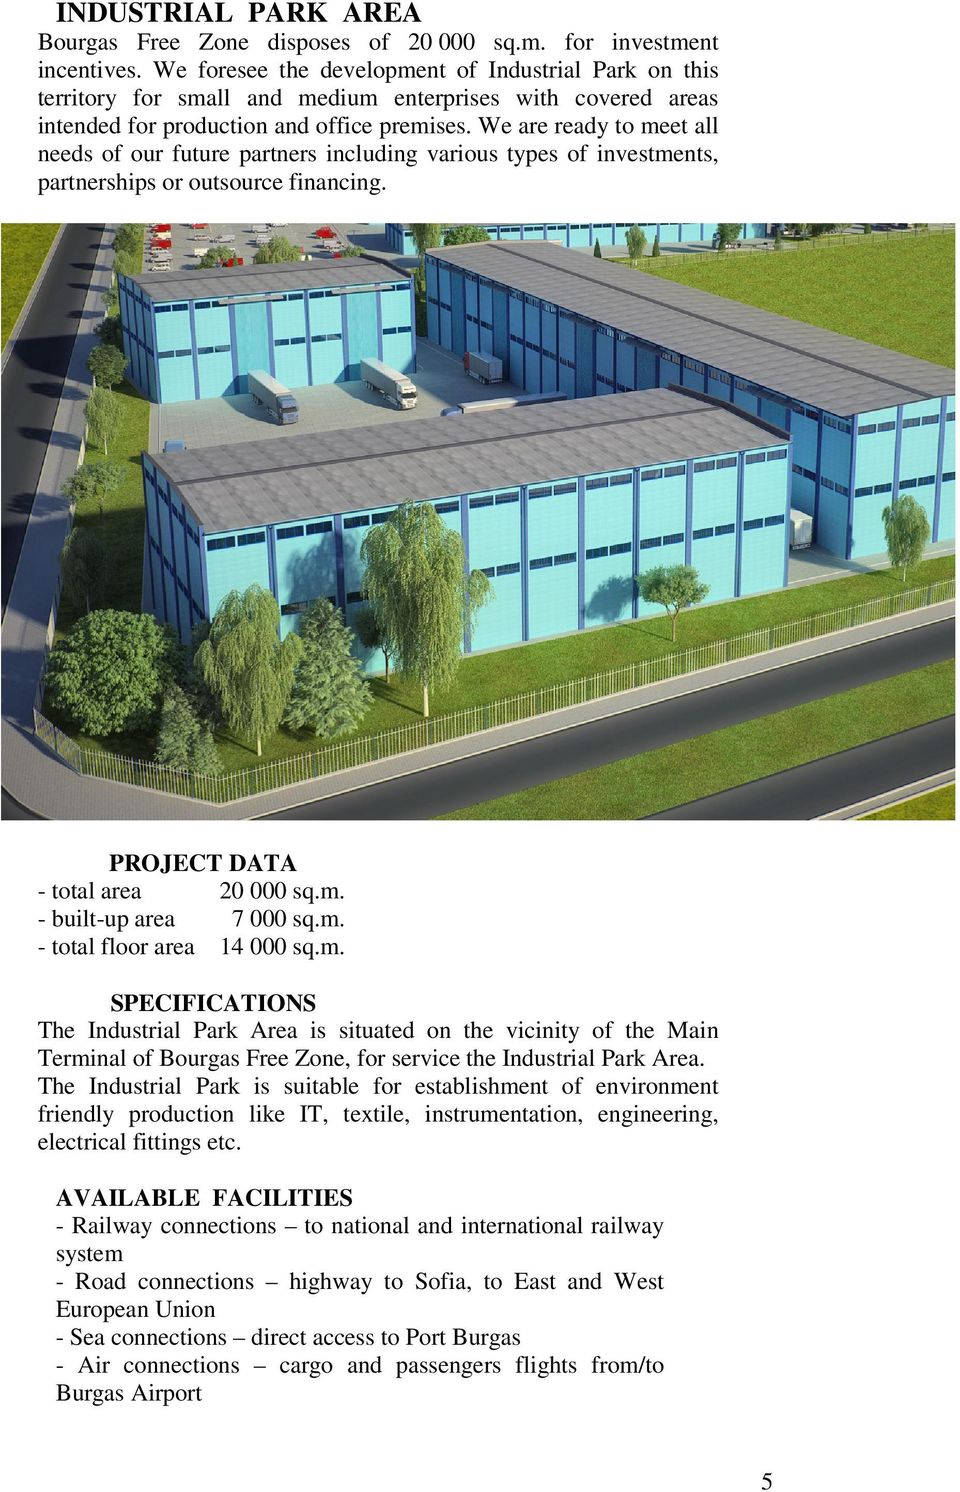 We are ready to meet all needs of our future partners including various types of investments, partnerships or outsource financing. PROJECT DATA - total area 20 000 sq.m. - built-up area 7 000 sq.m. - total floor area 14 000 sq.